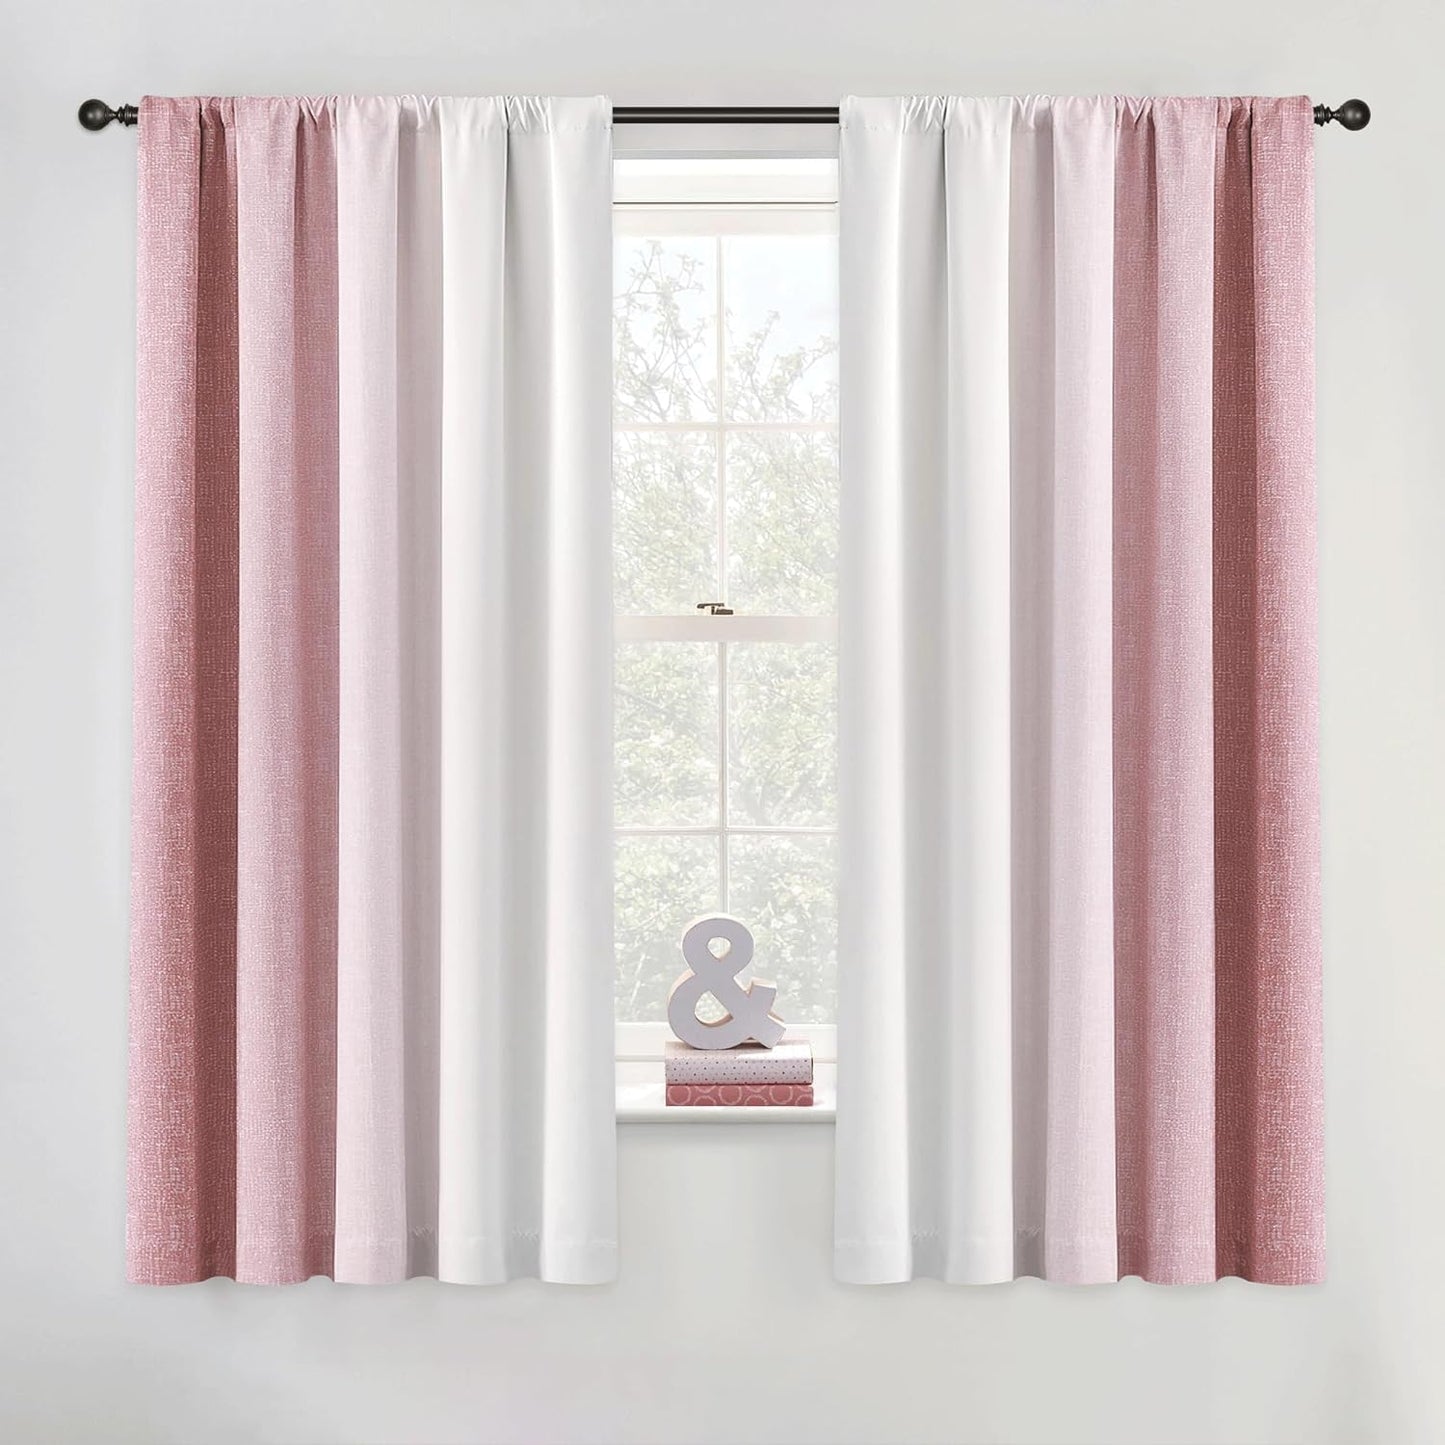 Geomoroccan Ombre 100% Blackout Curtains 84 Inches Long, Pink and White 2 Tone Reversible Window Treatments for Bedroom Living Room, Linen Gradient Print Rod Pocket Drapes 52" W 2 Panel Sets  Geomoroccan Pink 52"X54"X2 